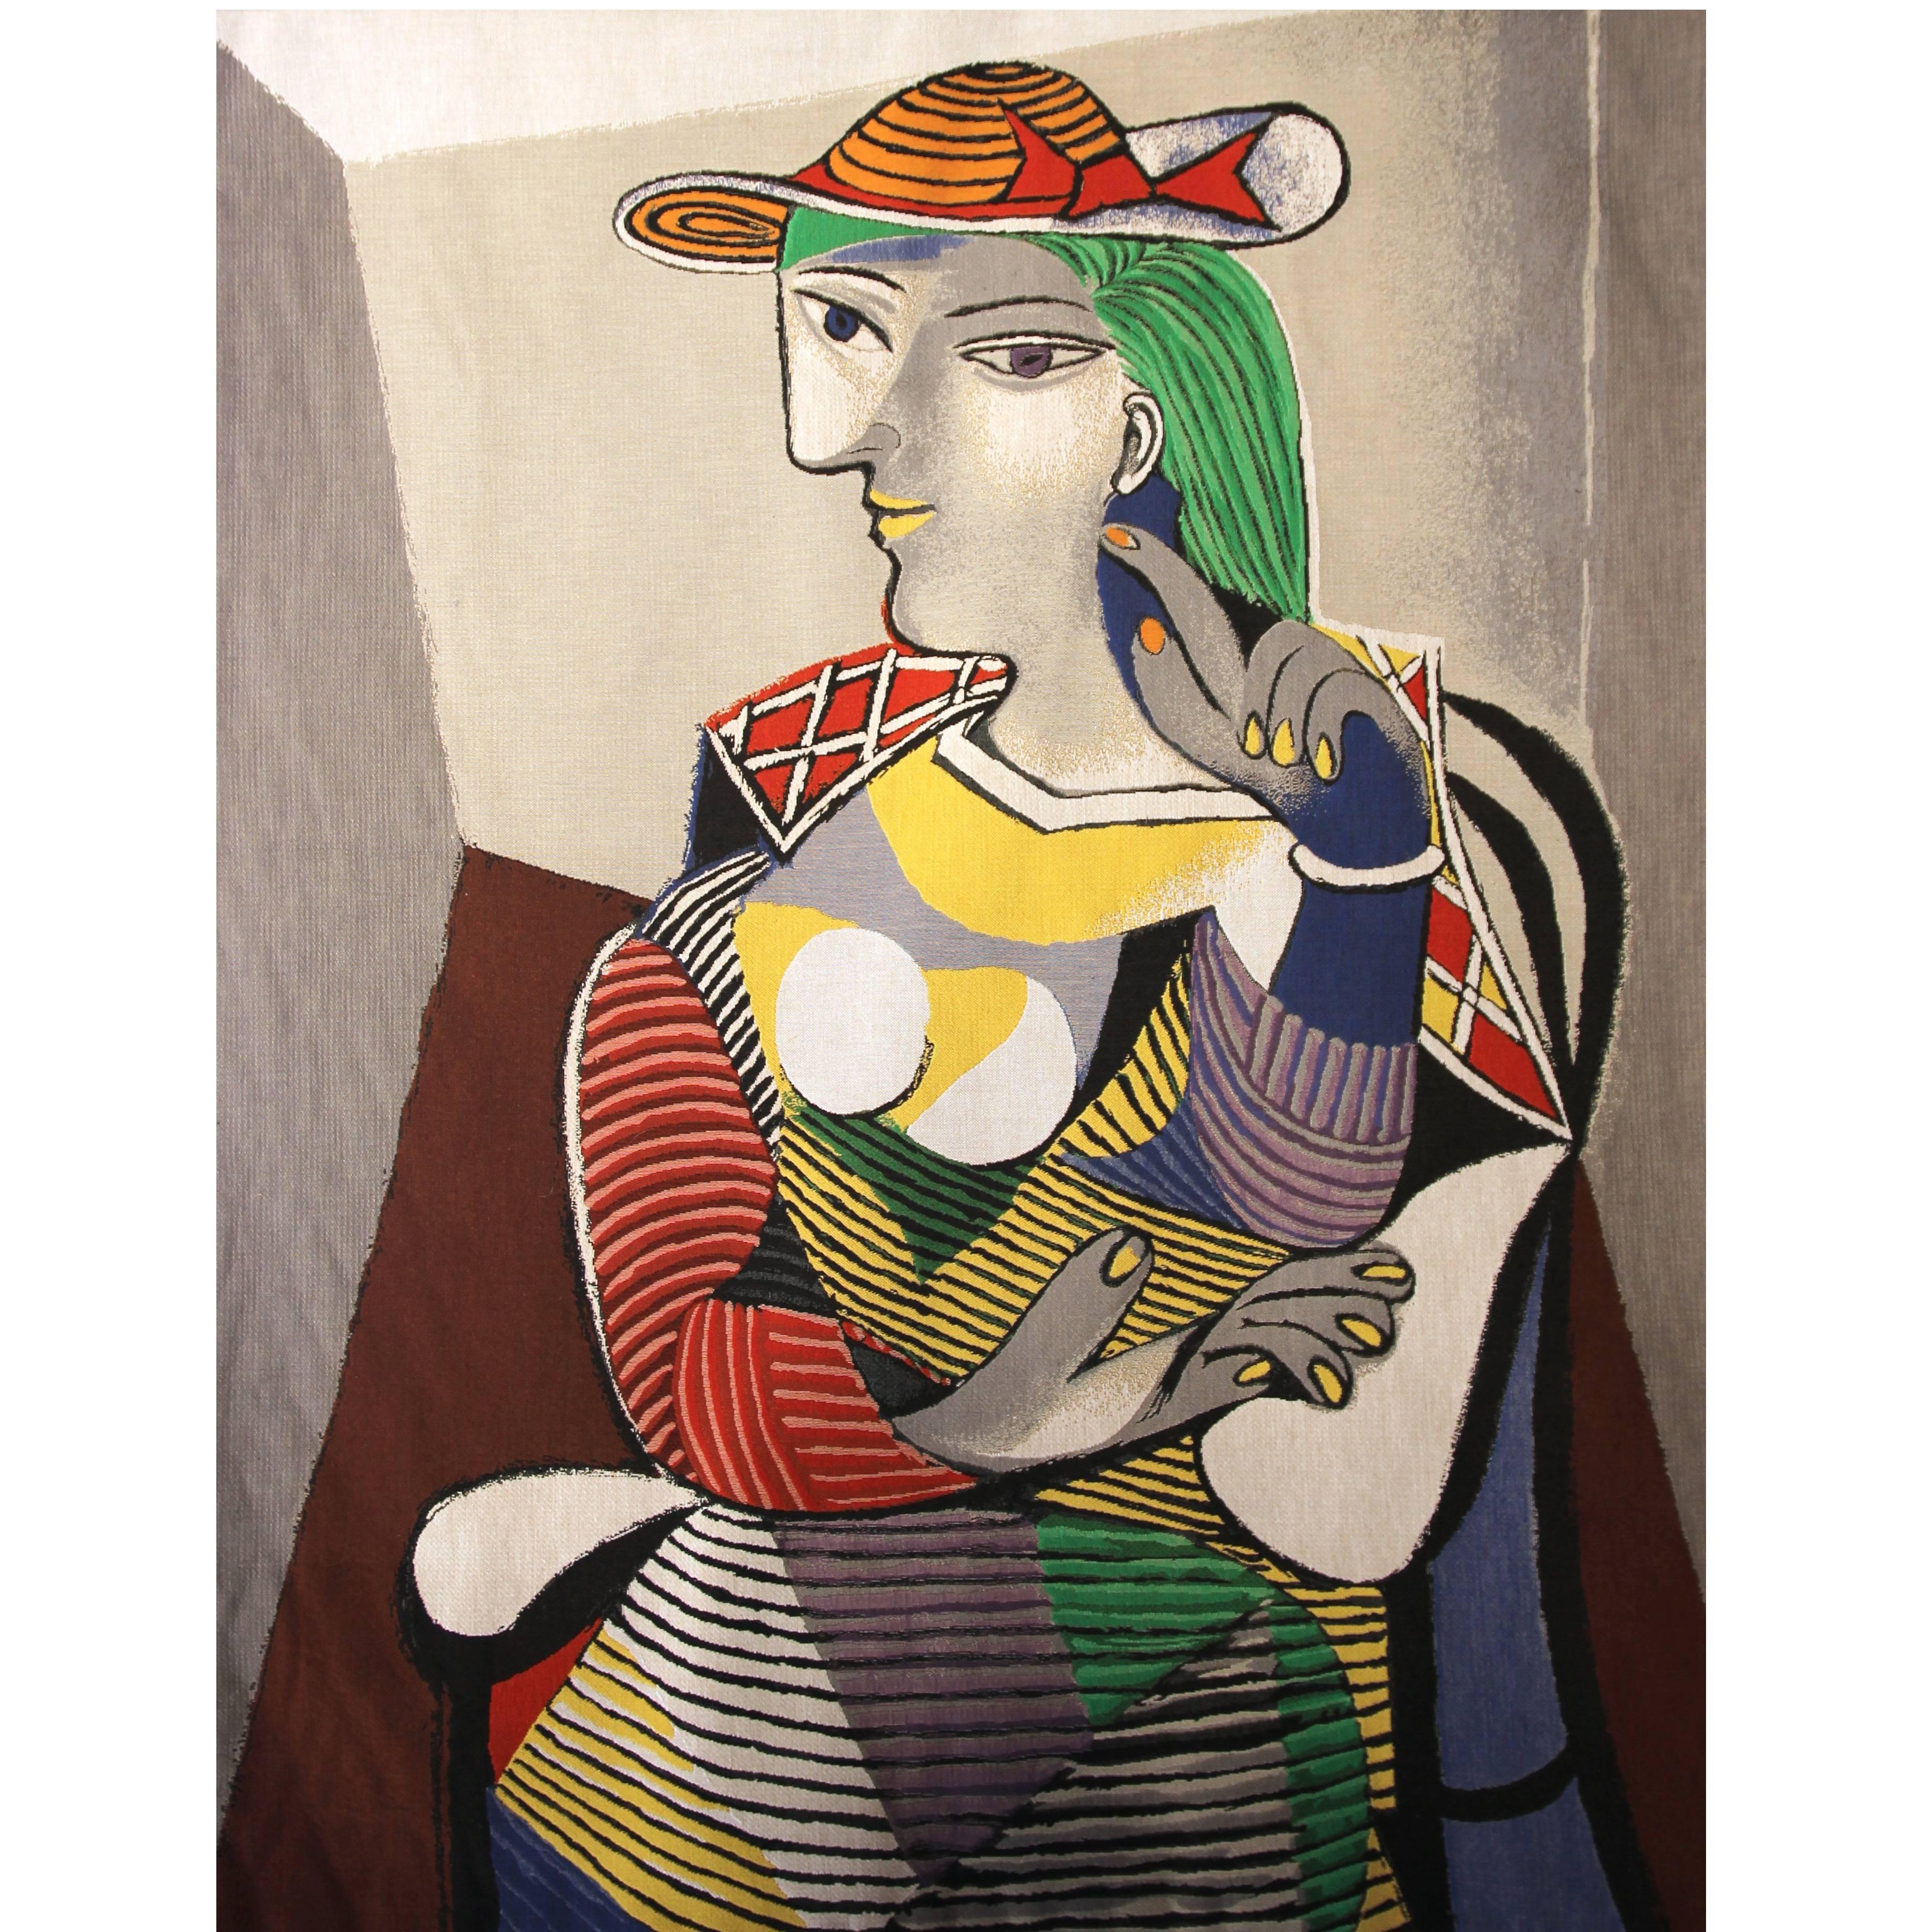 After Pablo Picasso, "Portrait de Marie Thérèse, 1937" Tapestry